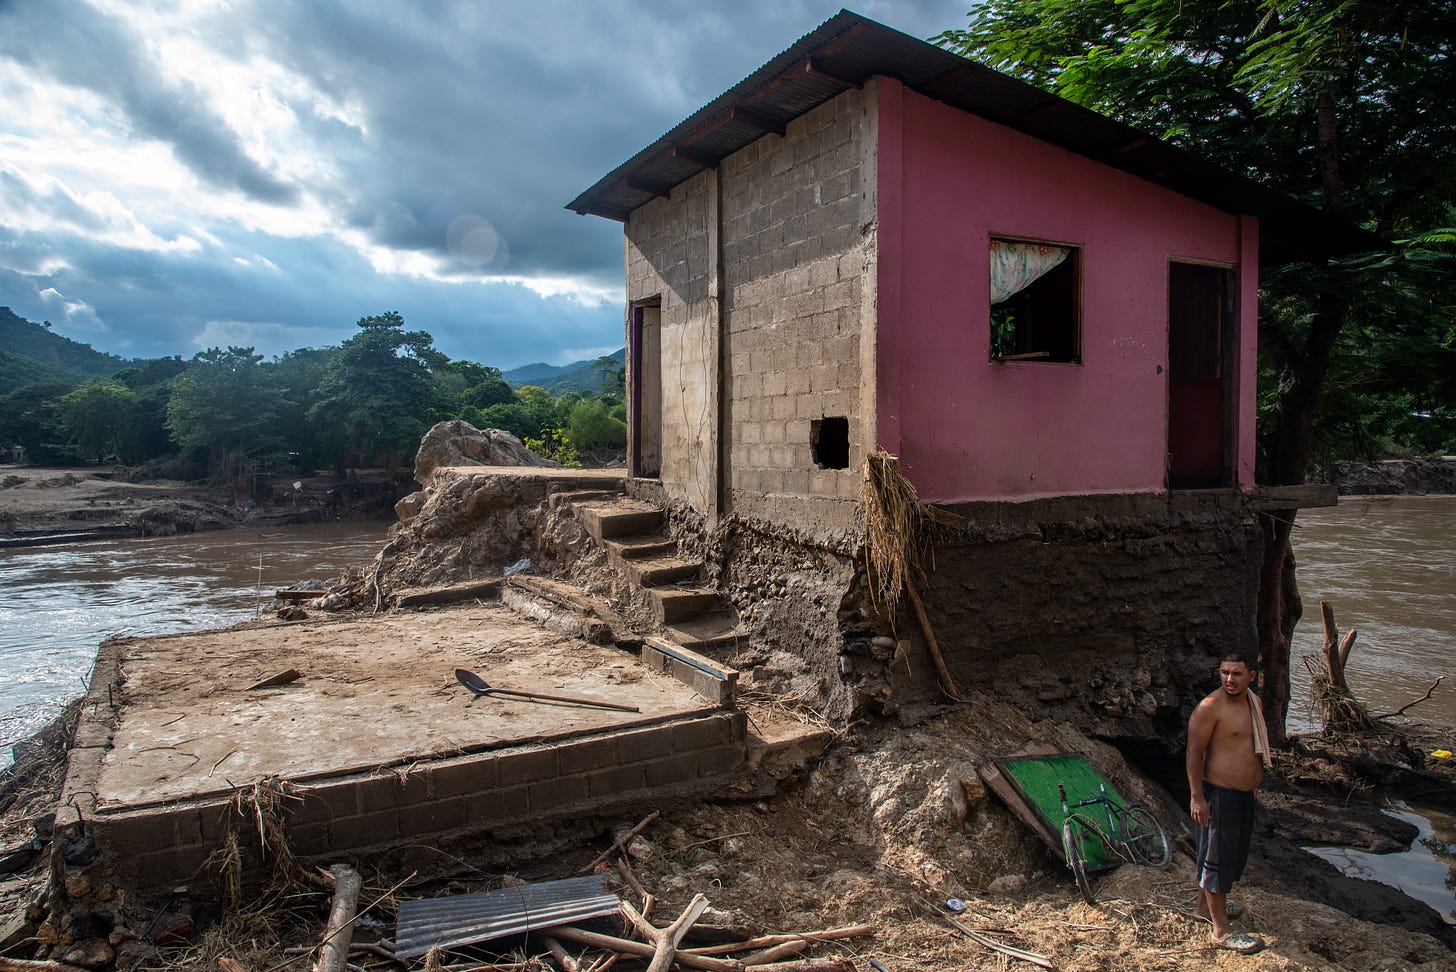 SAN PEDRO SULA, CORTES, HONDURAS - 2020/11/07: A man in front of his home that was destroyed when the Chemelecon River flooded in San Pedro Sula